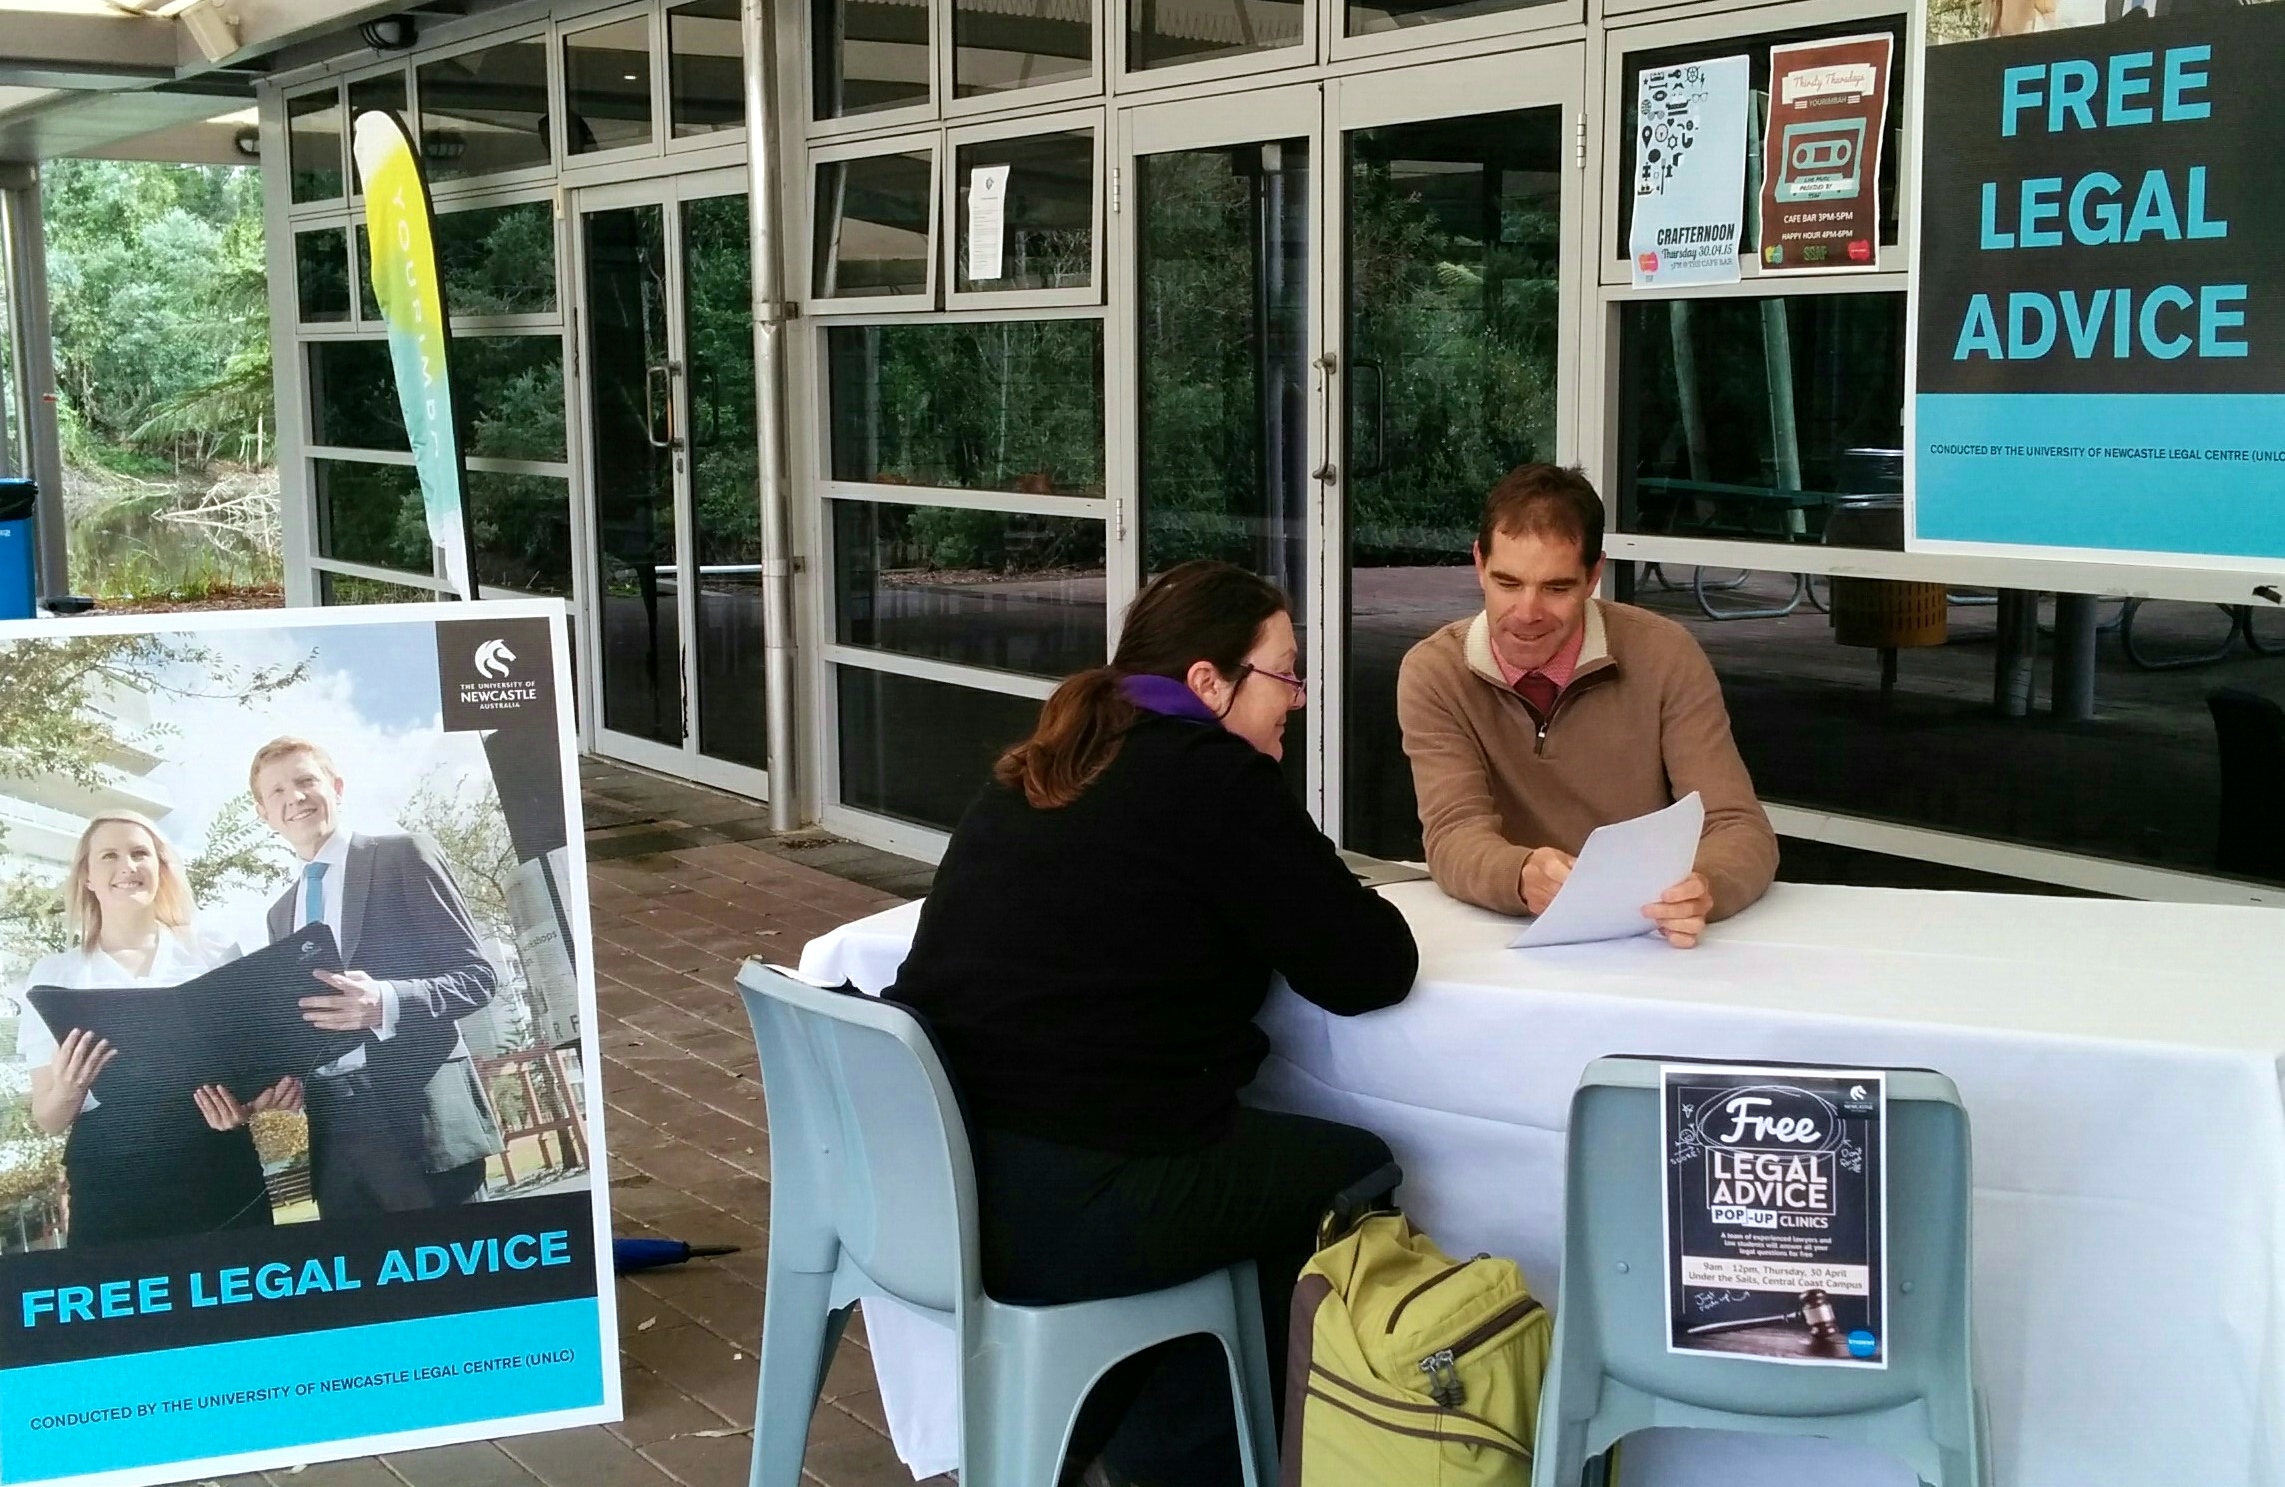 Free Legal Advice for Ourimbah Students, University of Newcastle